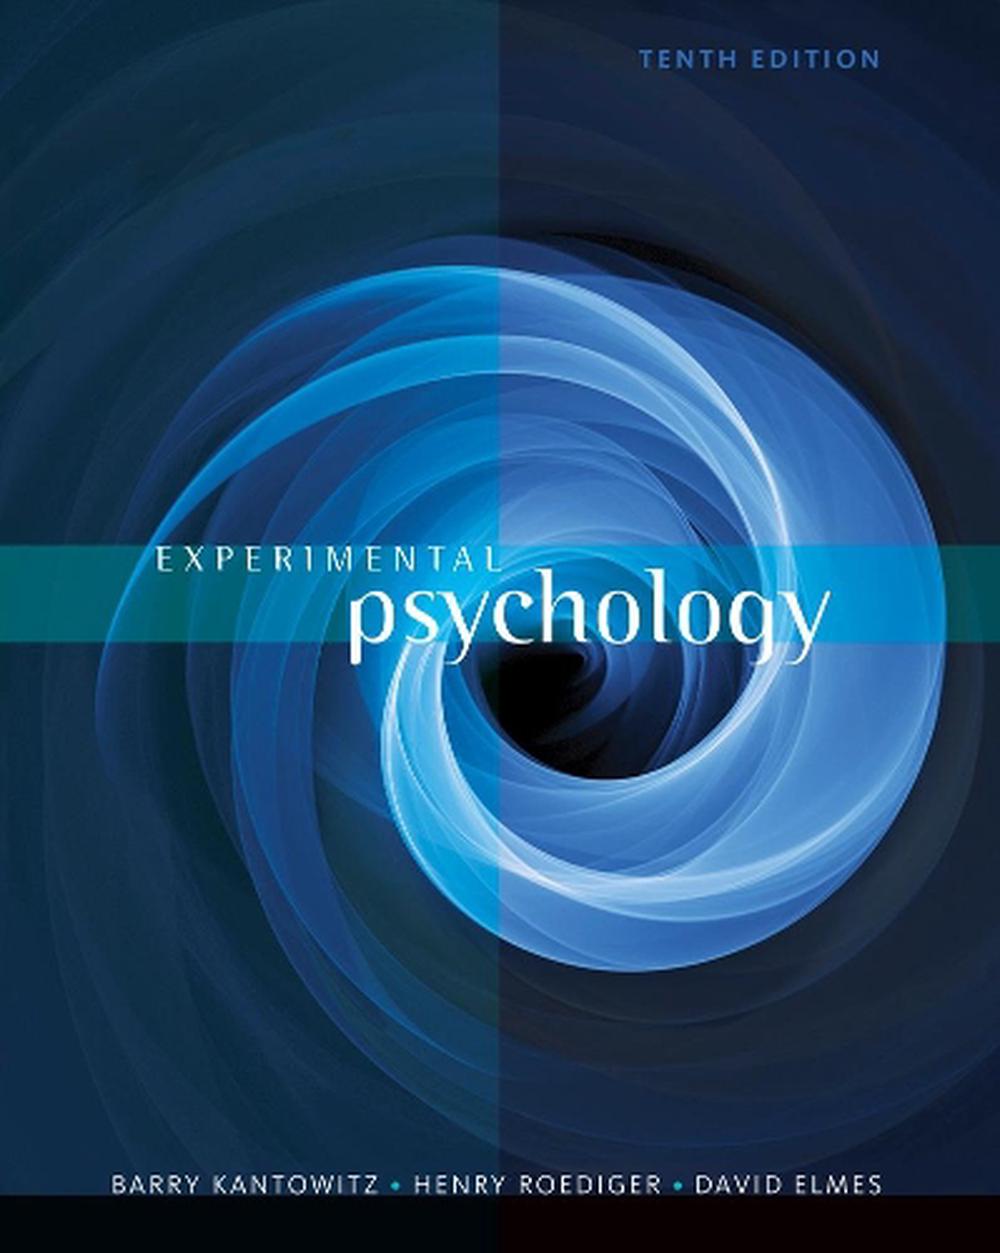 research about experimental psychology